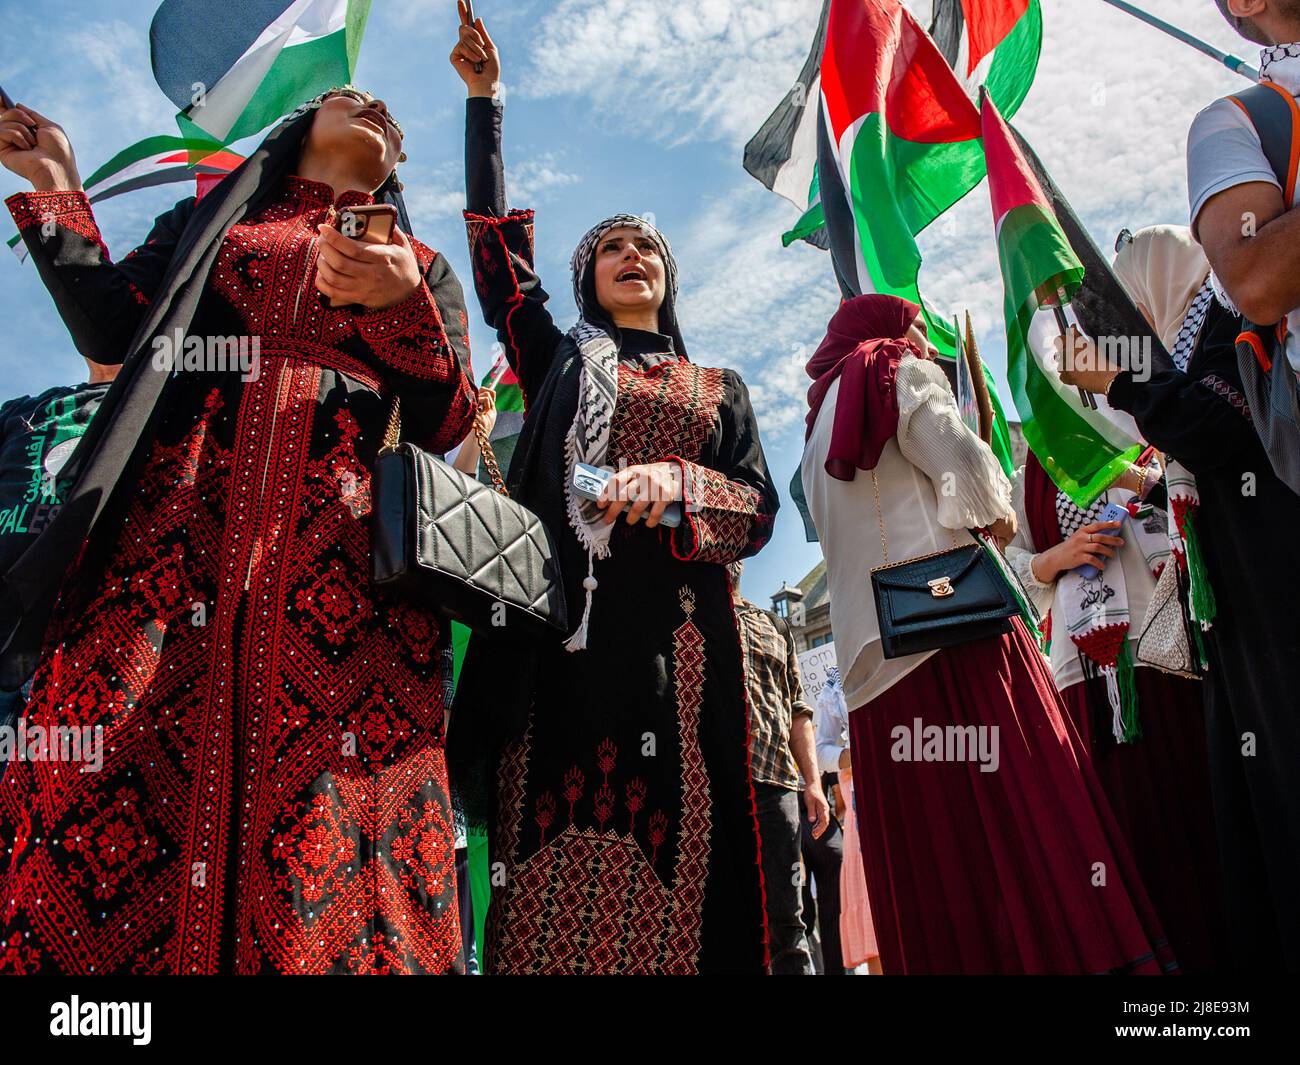 Palestinian female demonstrators are seen wearing traditional Palestinian dresses during a rally on the 74th anniversary of Nakba Day at the Dam square in Amsterdam. Palestinian demonstrators gathered for a rally at the Dam square in Amsterdam on the occasion of the 74th anniversary of Nakba Day and to condemn the murder of Palestinian-American journalist Shireen Abu Akleh by Israeli forces. The word “Nakba” means “catastrophe” in Arabic, and refers to the systematic ethnic cleansing of two-thirds of the Palestinian population at the time by Zionist paramilitaries between 1947-1949 and the nea Stock Photo